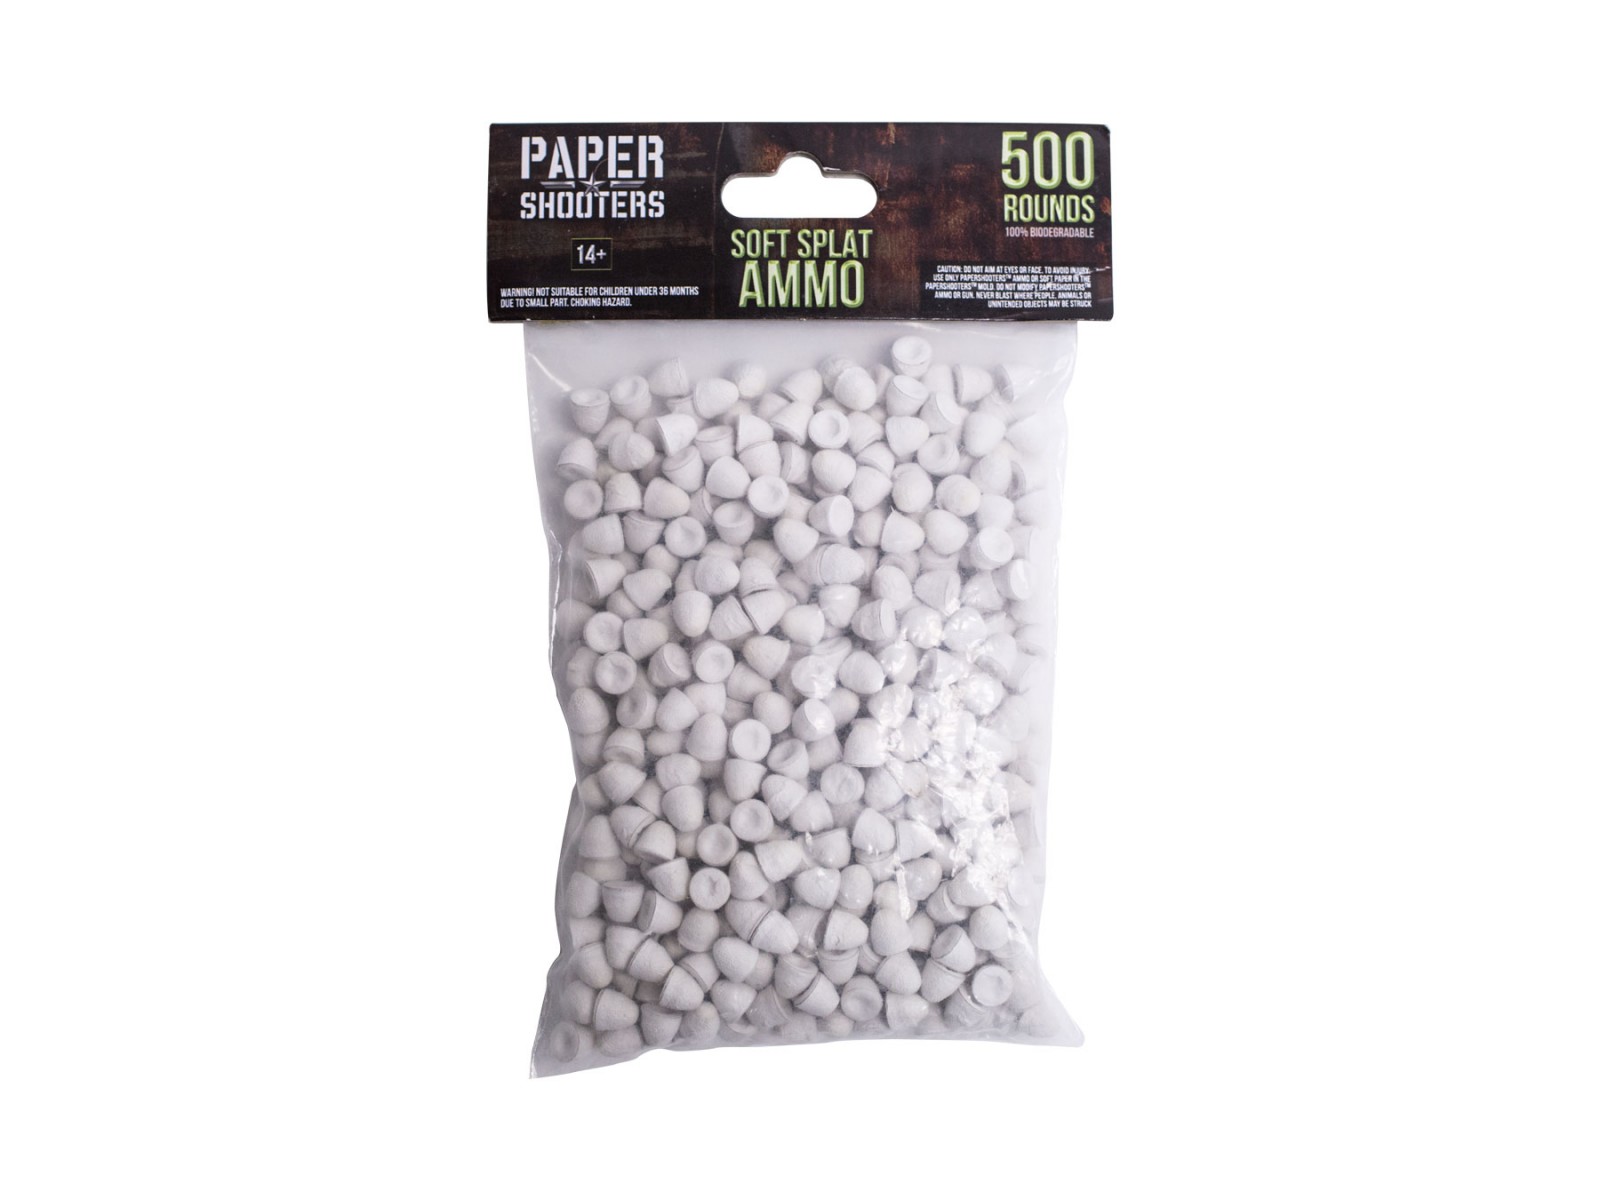 Paper Shooters Ammo Bag, 500ct